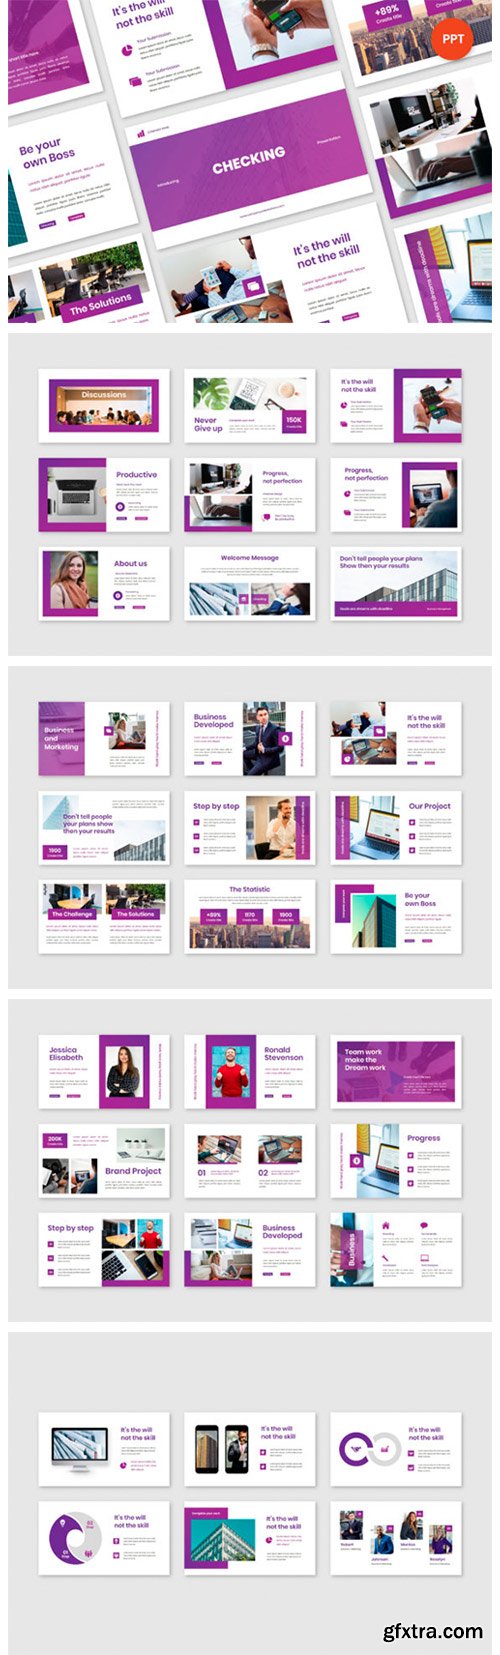 Checking Business Plan Powerpoint 6774203